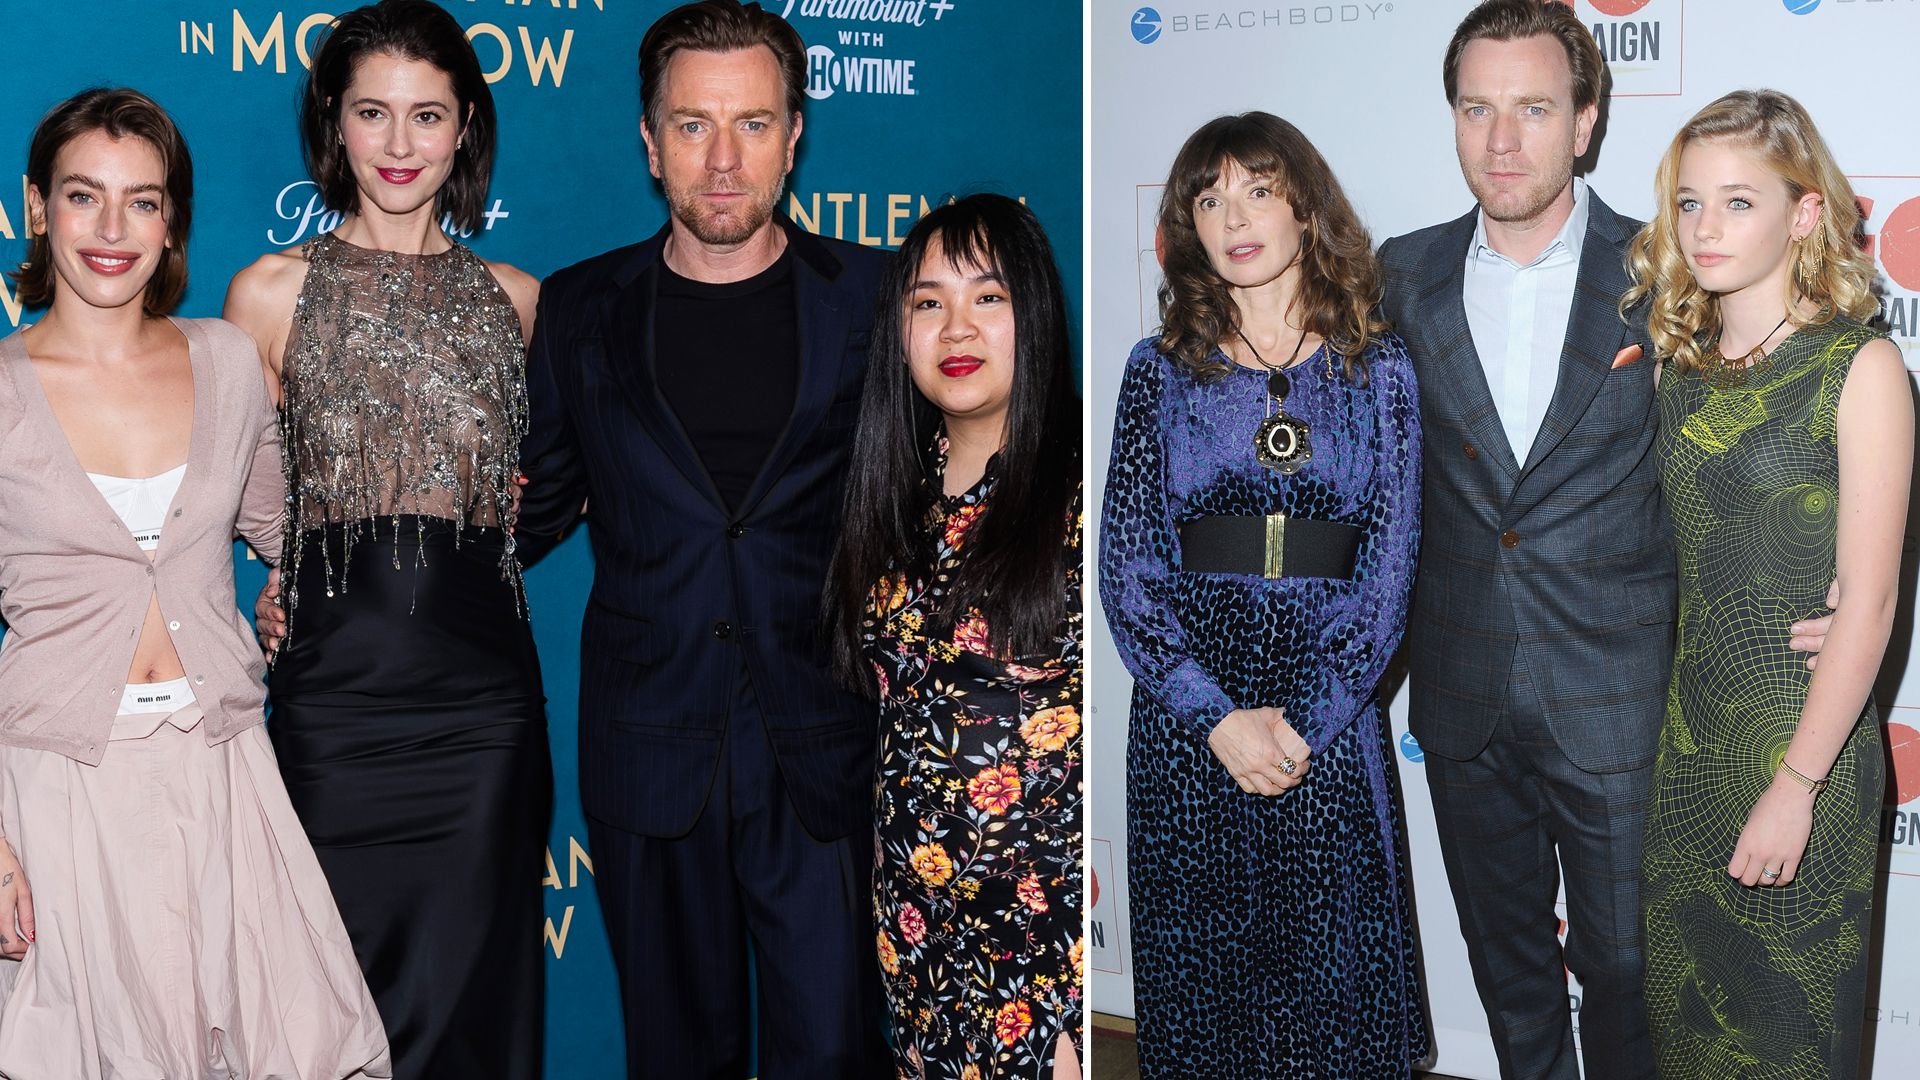 Ewan McGregor with his wife, ex-wife and children